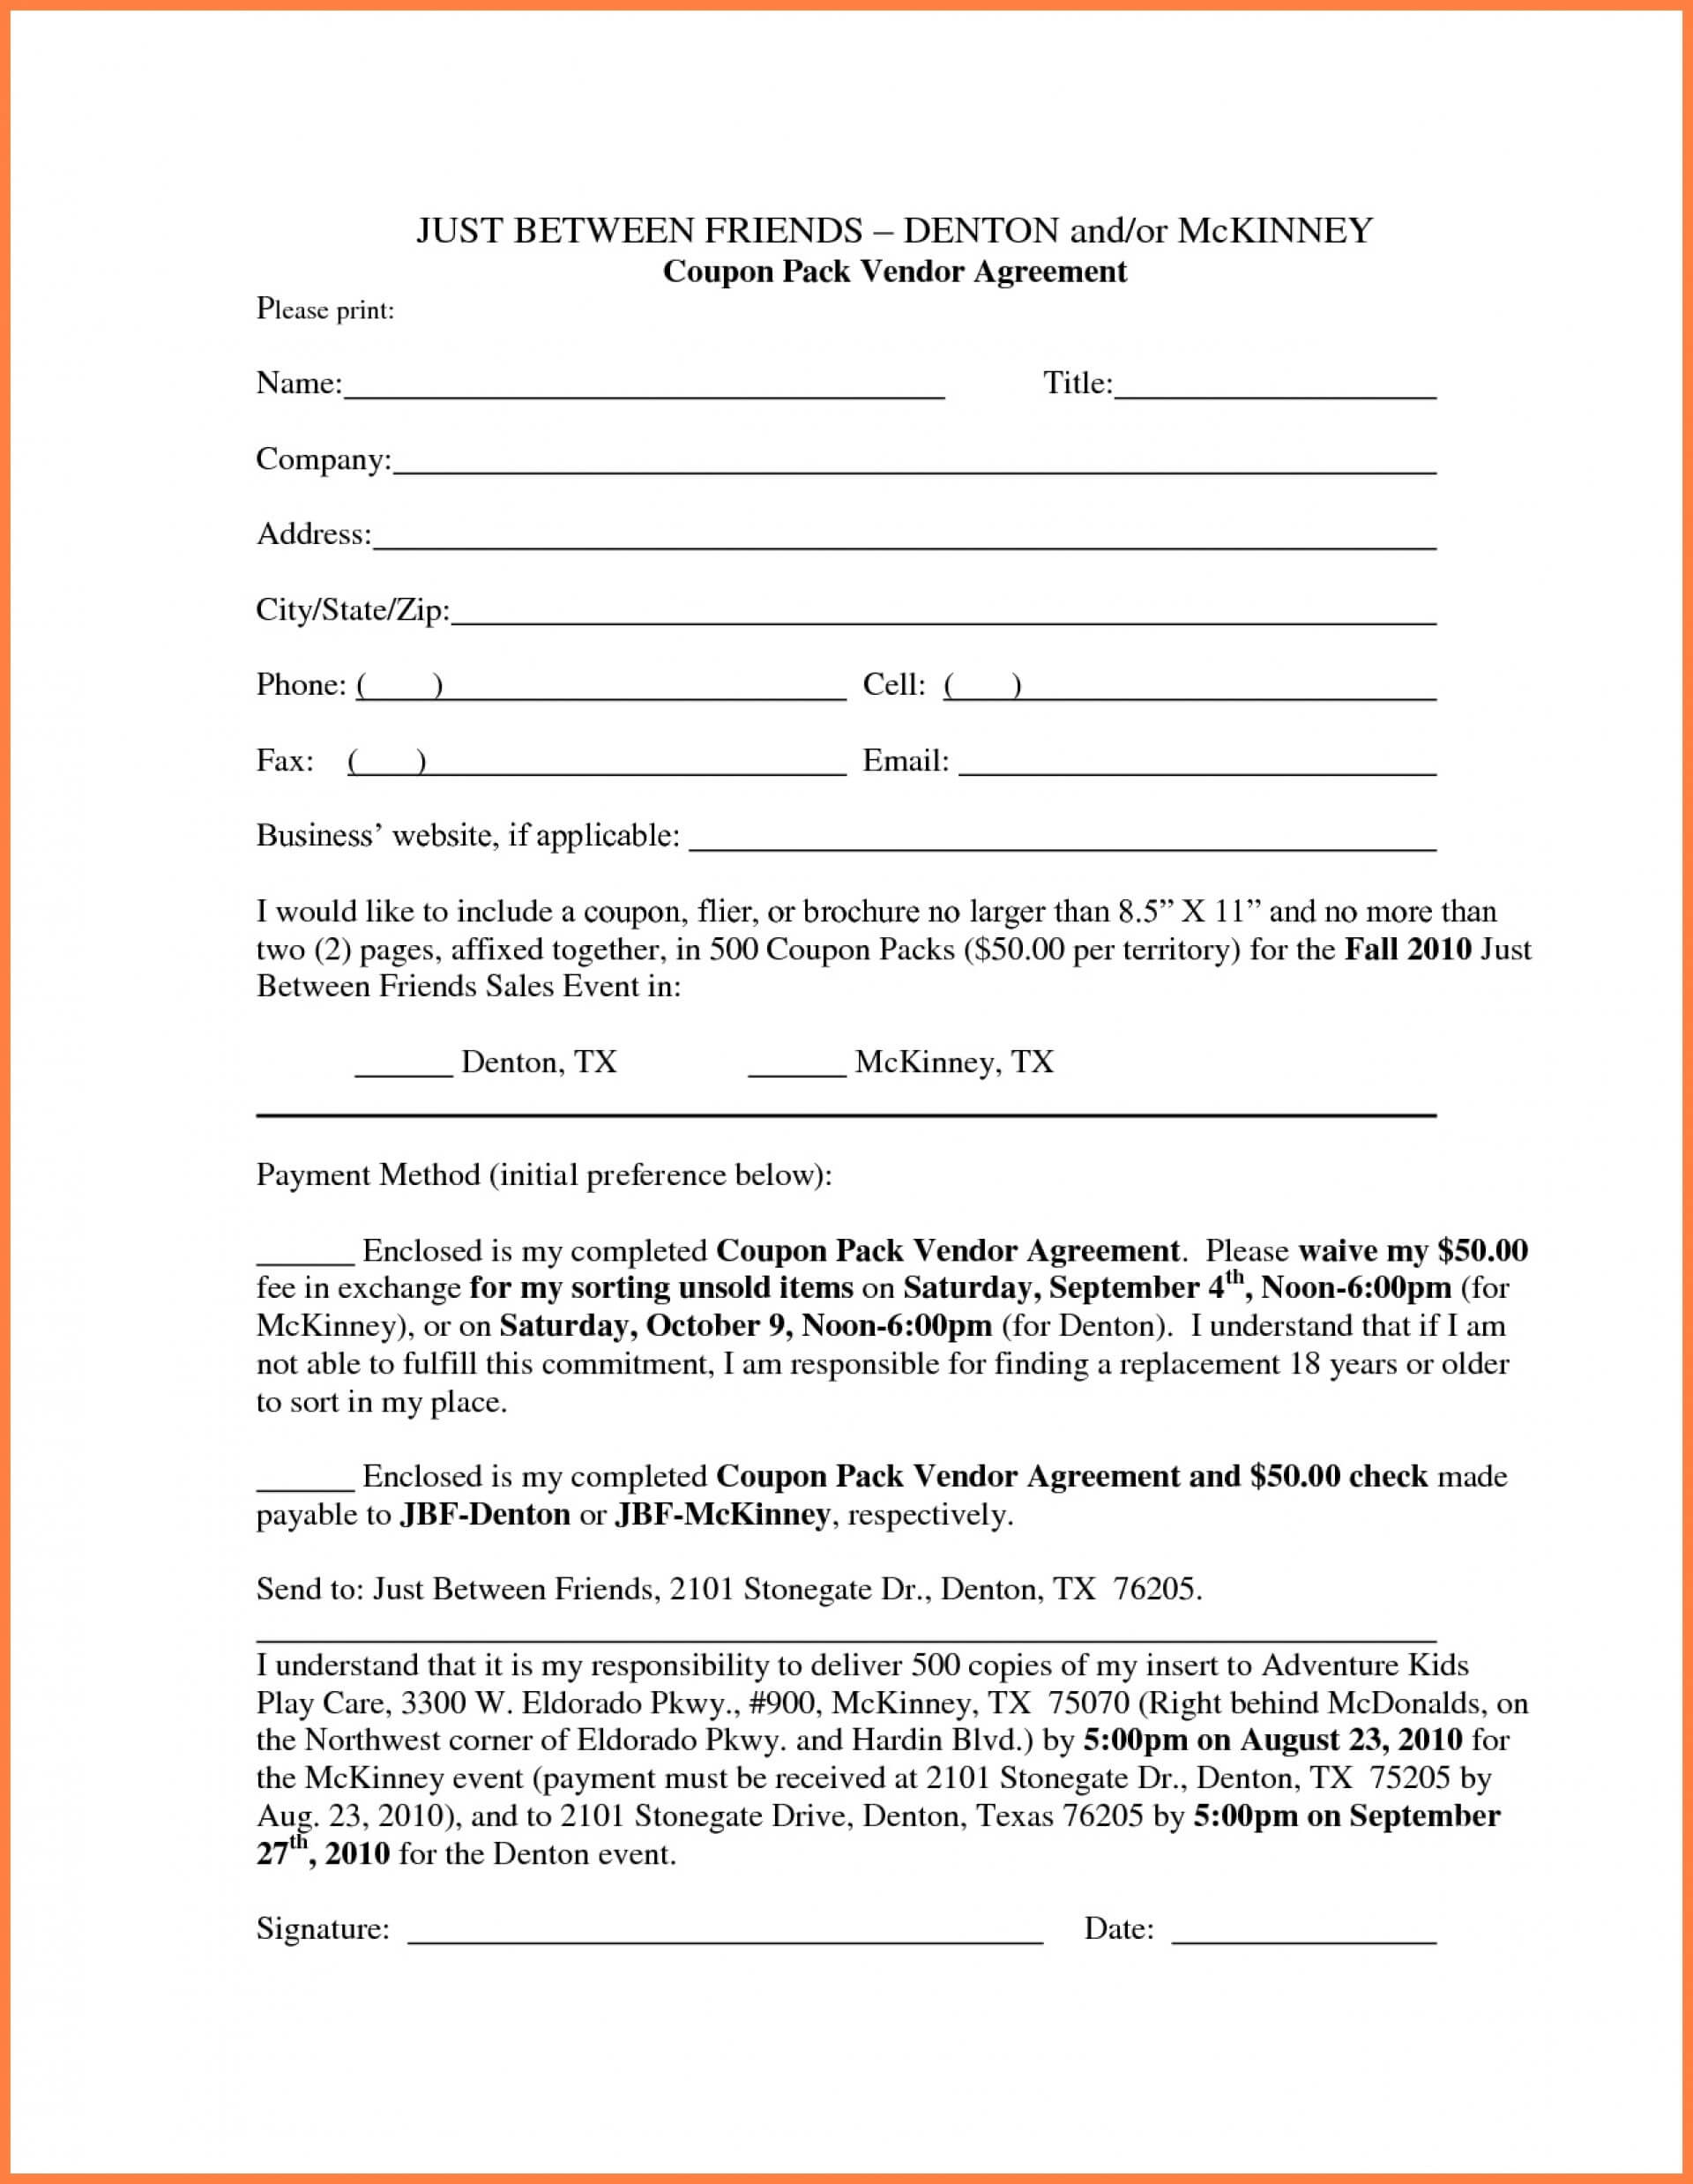 025 Personal Loan Agreement Template Canada Free Printable Regarding Blank Loan Agreement Template